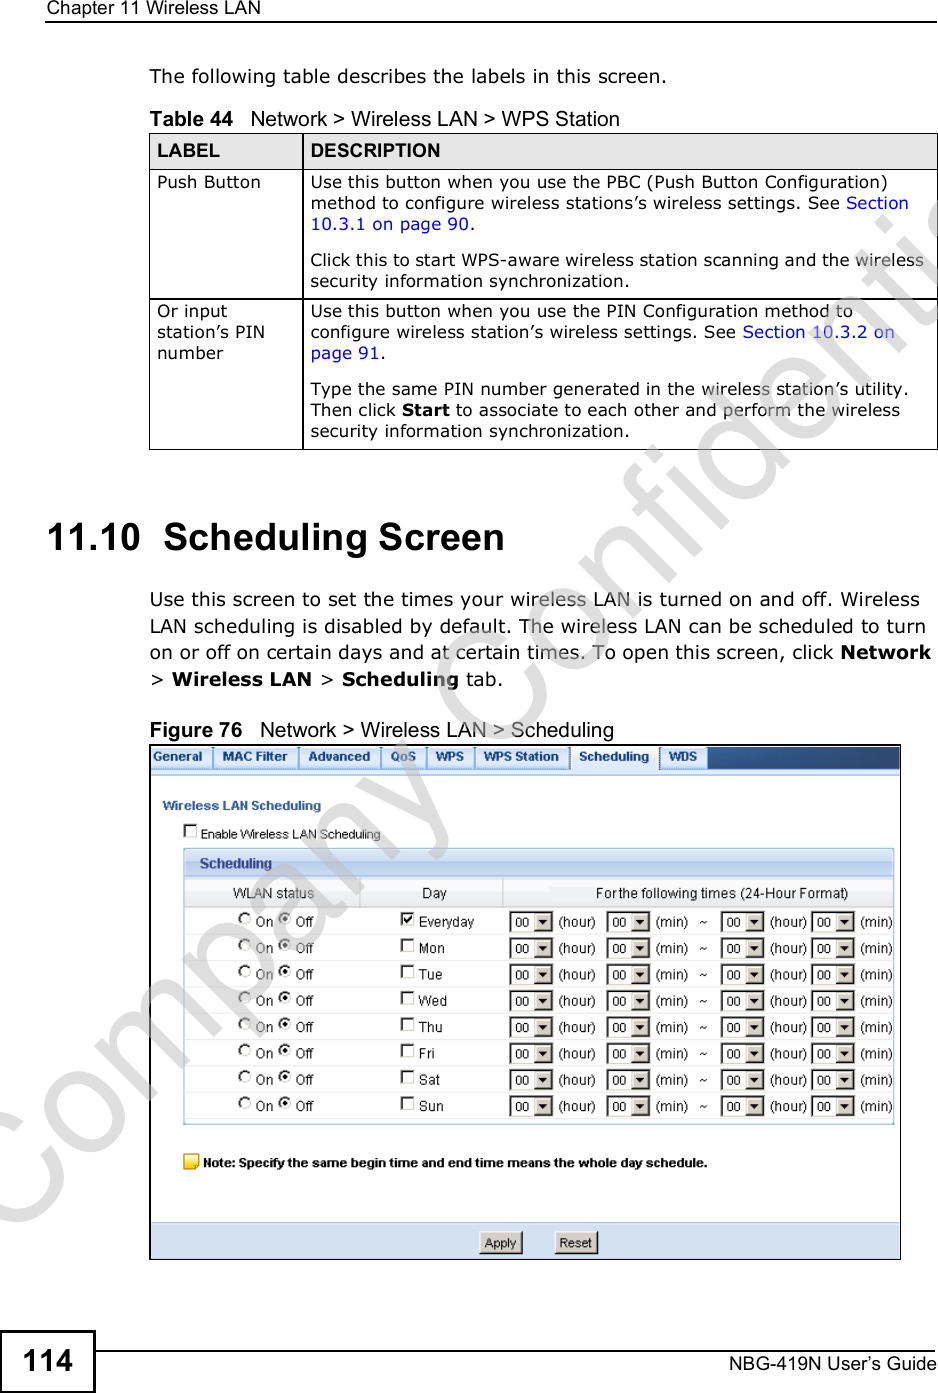 Chapter 11Wireless LANNBG-419N User s Guide114The following table describes the labels in this screen.11.10  Scheduling ScreenUse this screen to set the times your wireless LAN is turned on and off. Wireless LAN scheduling is disabled by default. The wireless LAN can be scheduled to turn on or off on certain days and at certain times. To open this screen, click Network &gt; Wireless LAN &gt; Scheduling tab.Figure 76   Network &gt; Wireless LAN &gt; SchedulingTable 44   Network &gt; Wireless LAN &gt; WPS StationLABEL DESCRIPTIONPush Button Use this button when you use the PBC (Push Button Configuration) method to configure wireless stations!s wireless settings. See Section 10.3.1 on page 90.Click this to start WPS-aware wireless station scanning and the wireless security information synchronization. Or input station!s PIN numberUse this button when you use the PIN Configuration method to configure wireless station!s wireless settings. See Section 10.3.2 on page 91.Type the same PIN number generated in the wireless station!s utility. Then click Start to associate to each other and perform the wireless security information synchronization. Company Confidential